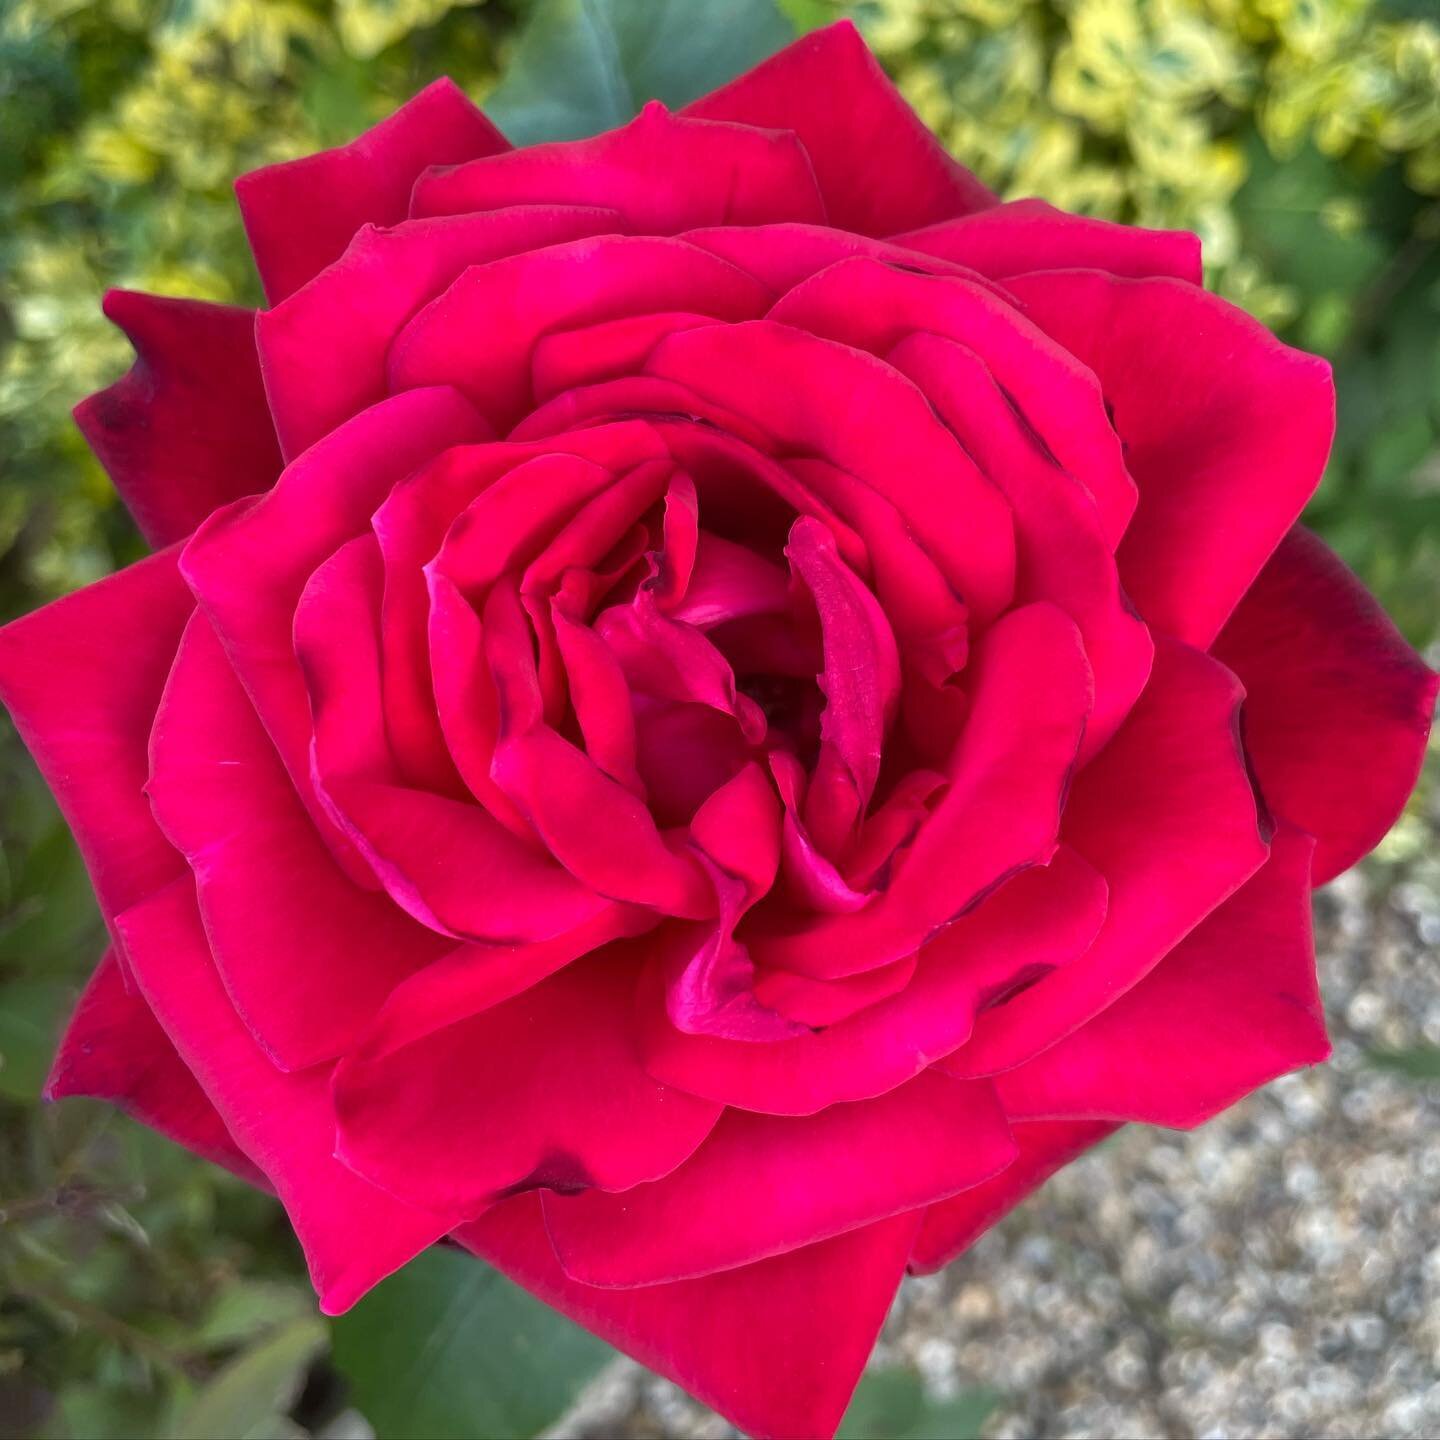 How could I not put this beauty on the grid? 

Roses are definitely one of my favourite flowers, but looking at them closer this year has made me realise how different each one is. And that in turn reminds me of how unique we all are and how we can b